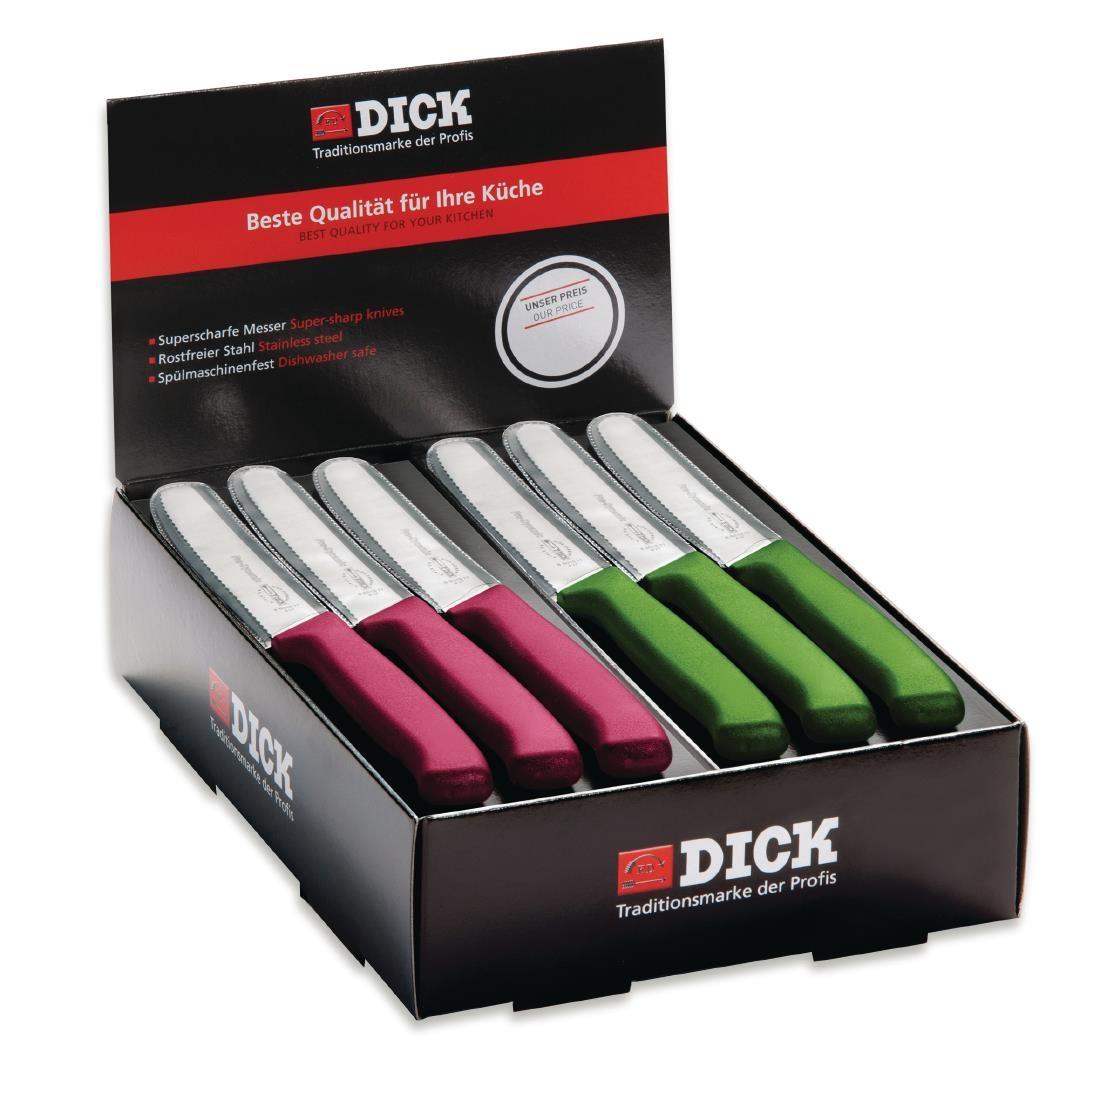 Dick Countertop 40 Piece Utility Knife Box Pink and Green - CN558  - 1